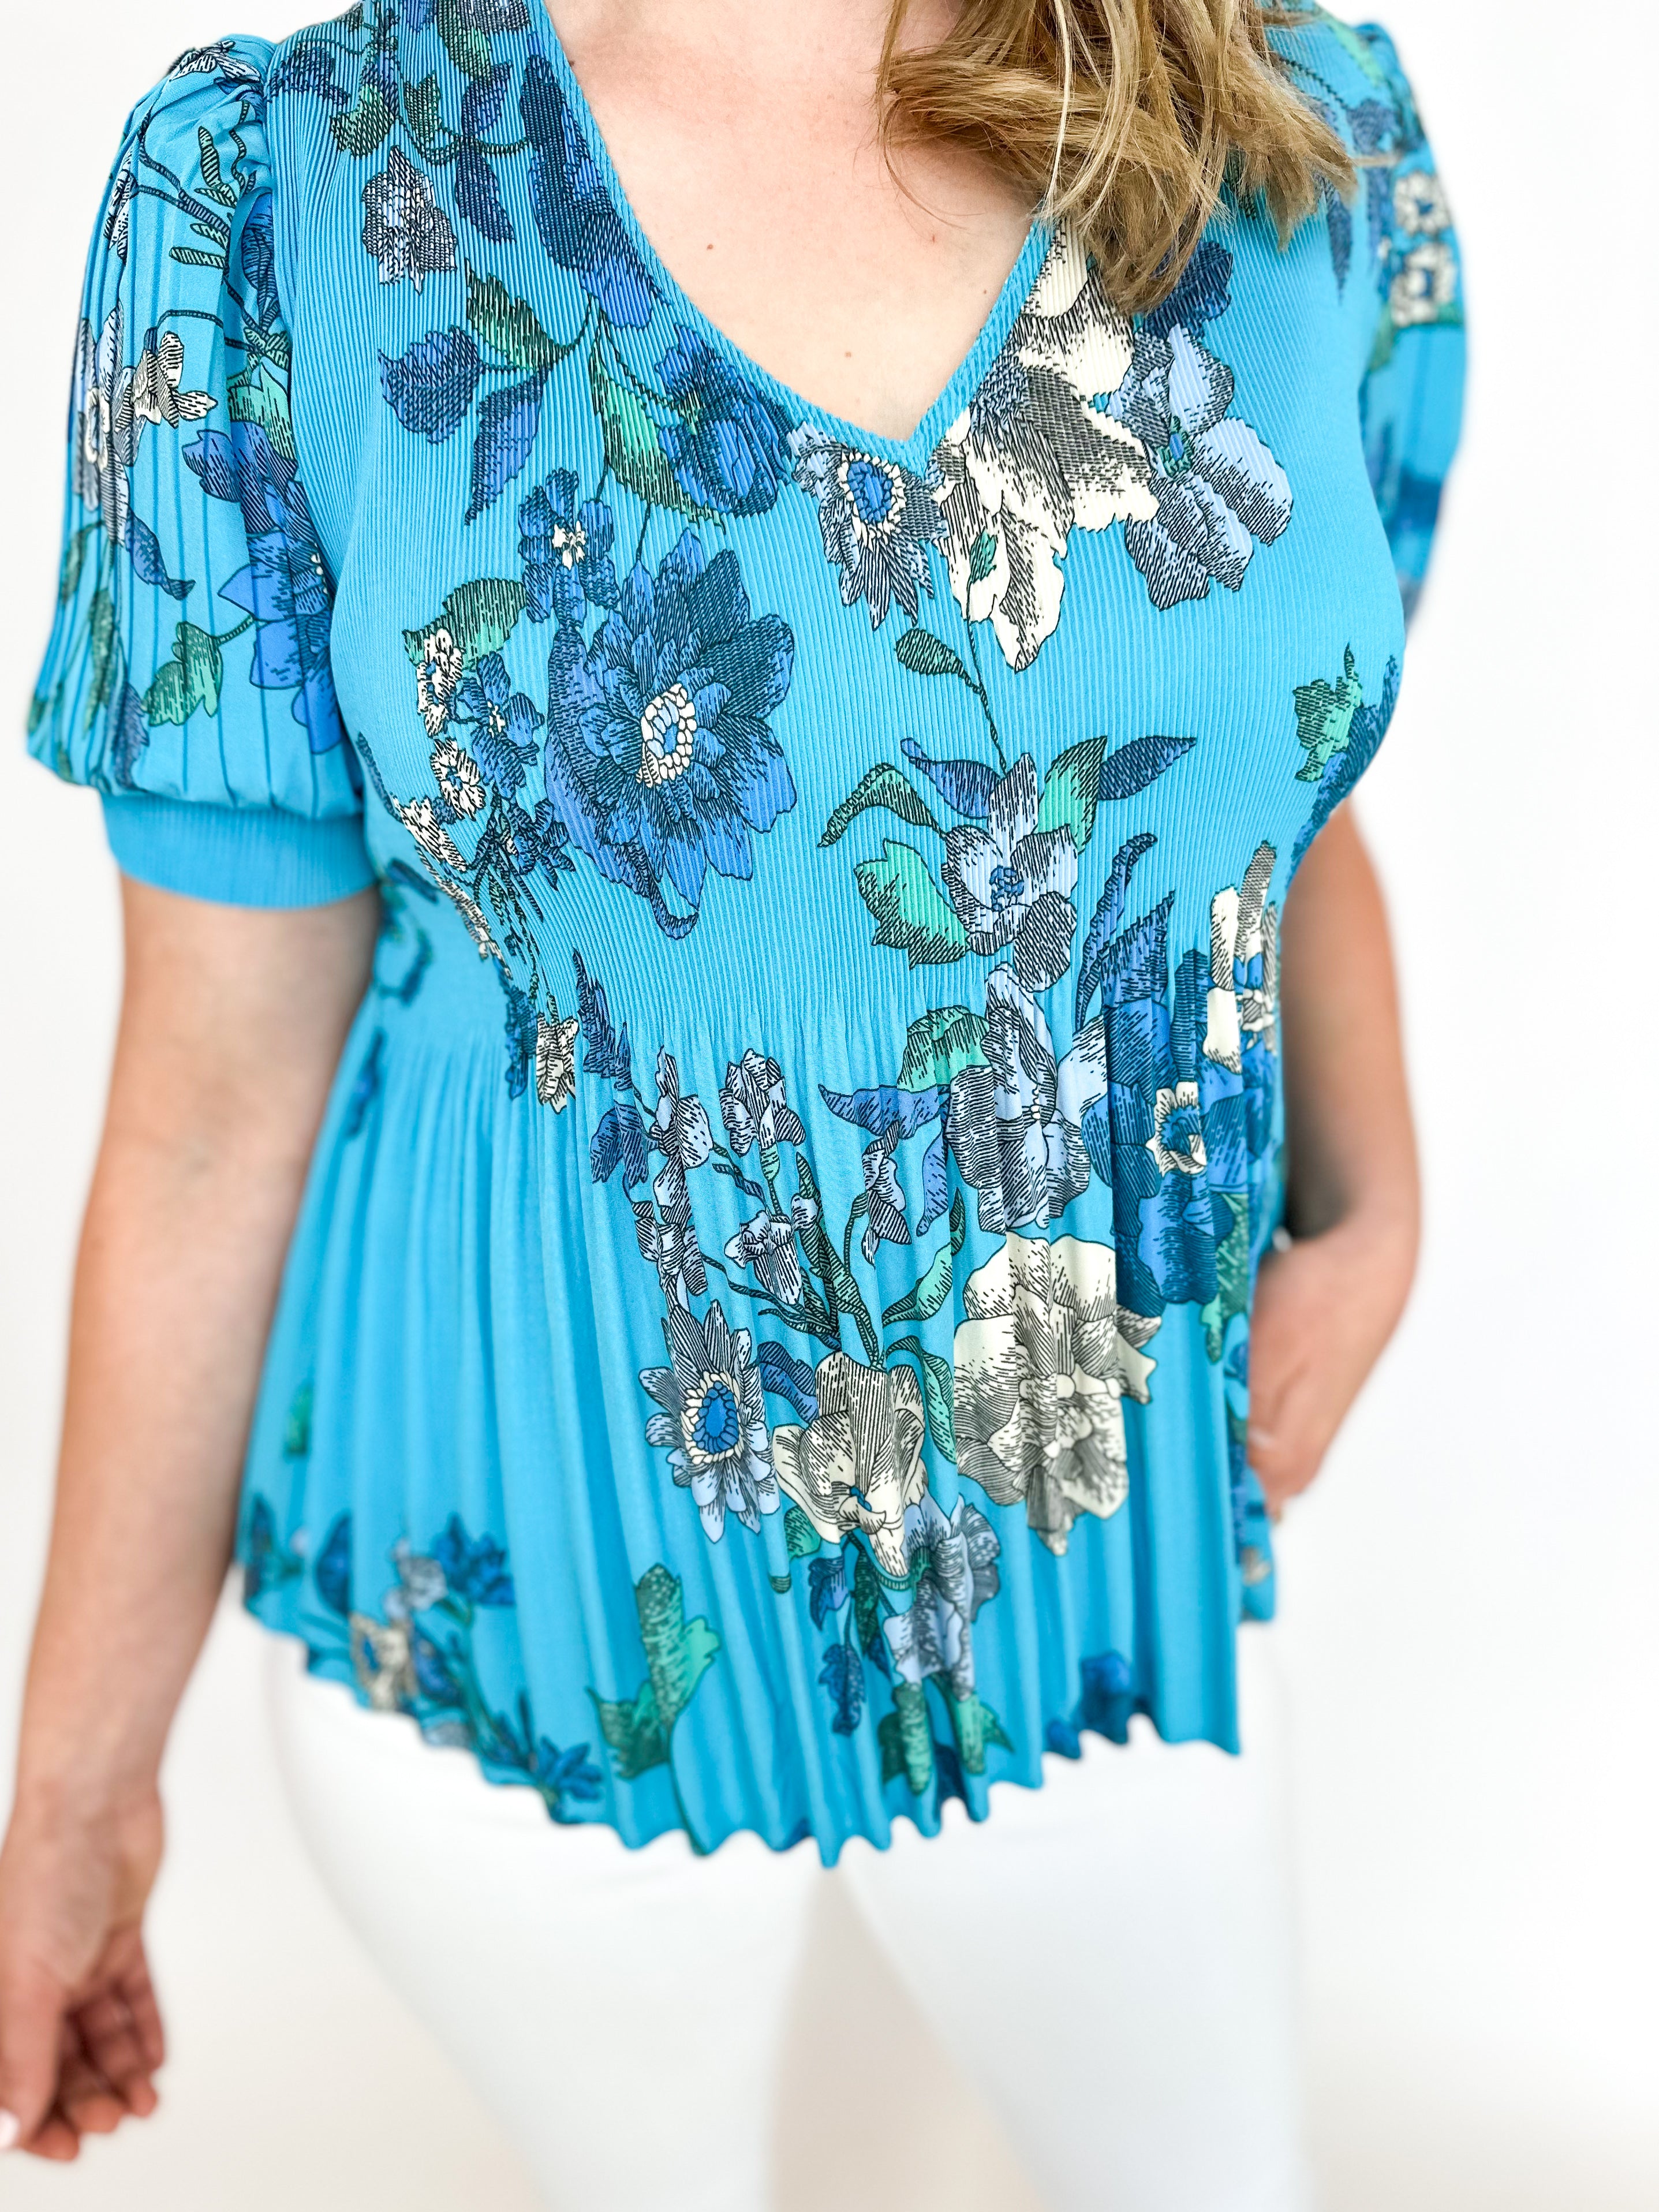 Pleated Peplum Blouse - Teal Garden-200 Fashion Blouses-CURRENT AIR CLOTHING-July & June Women's Fashion Boutique Located in San Antonio, Texas